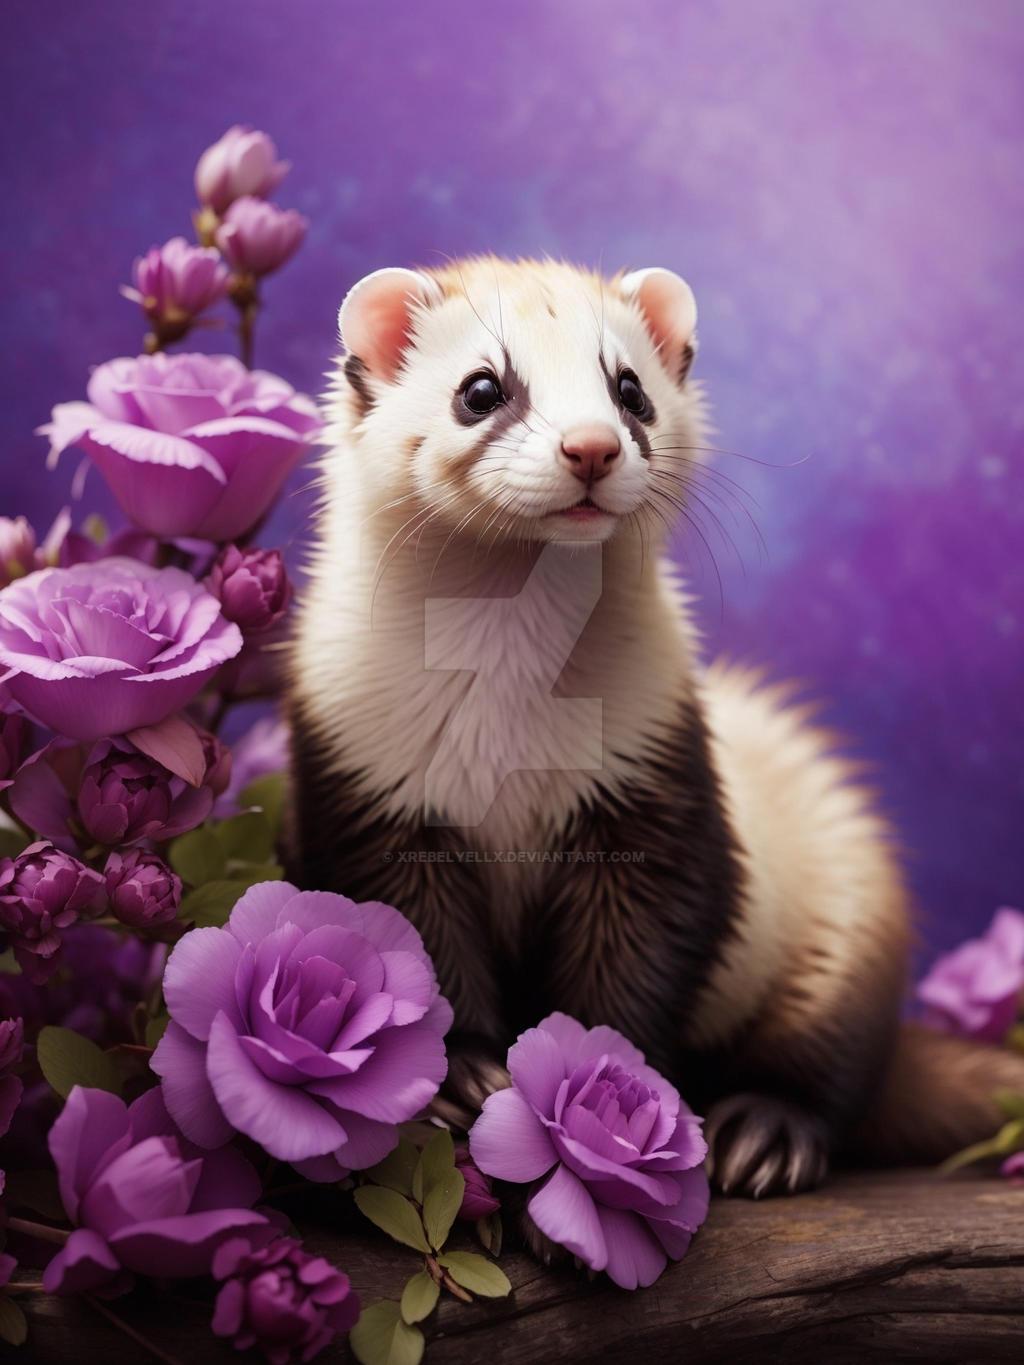 Ferret with purple flowers by xRebelYellx